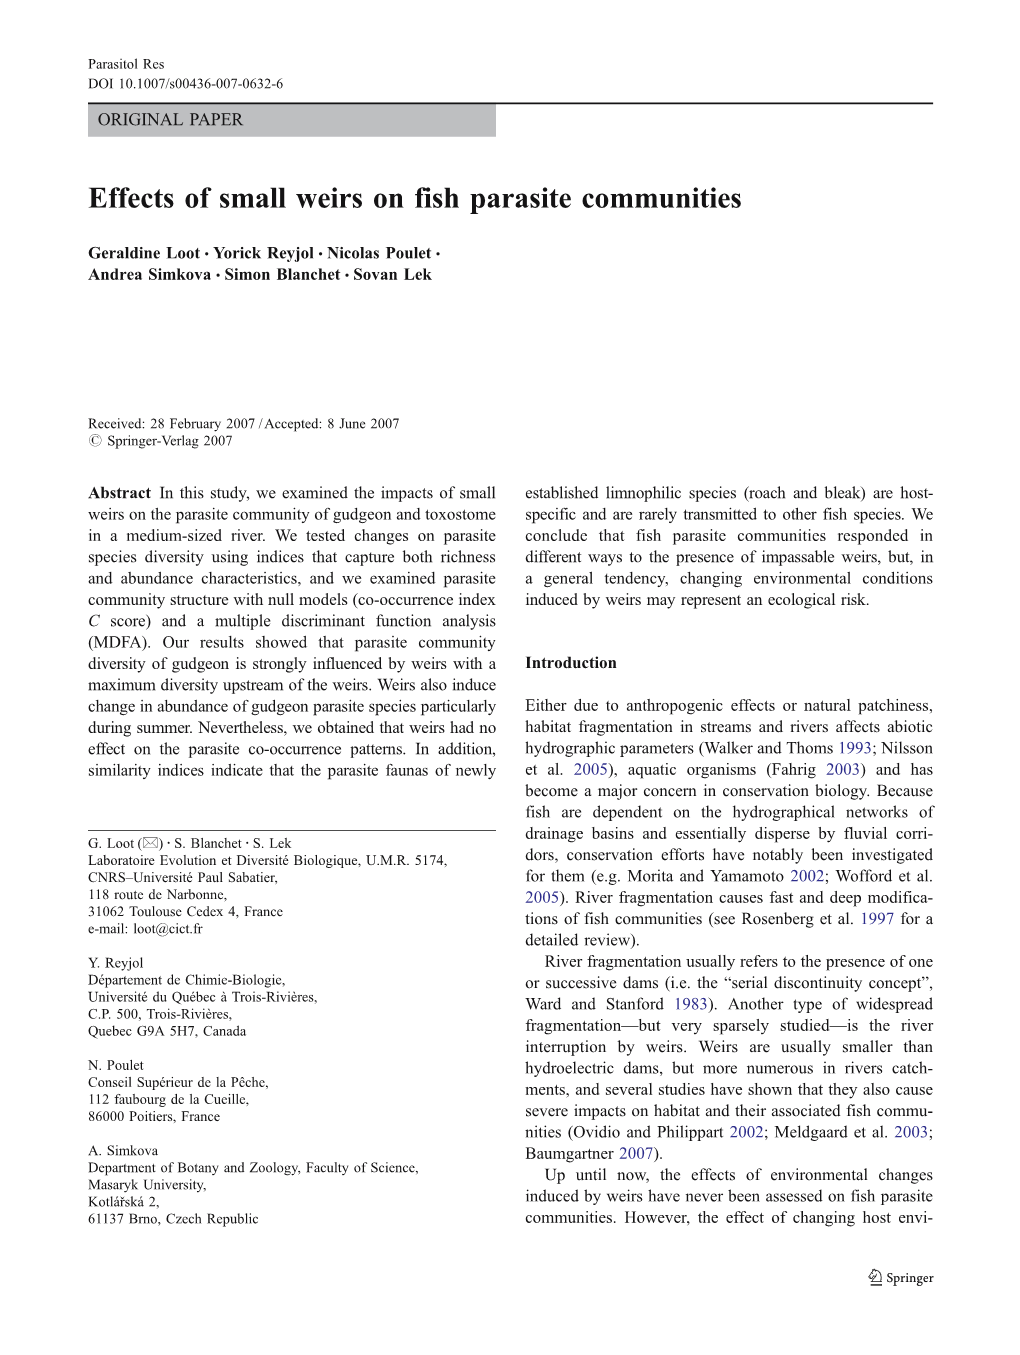 Effects of Small Weirs on Fish Parasite Communities